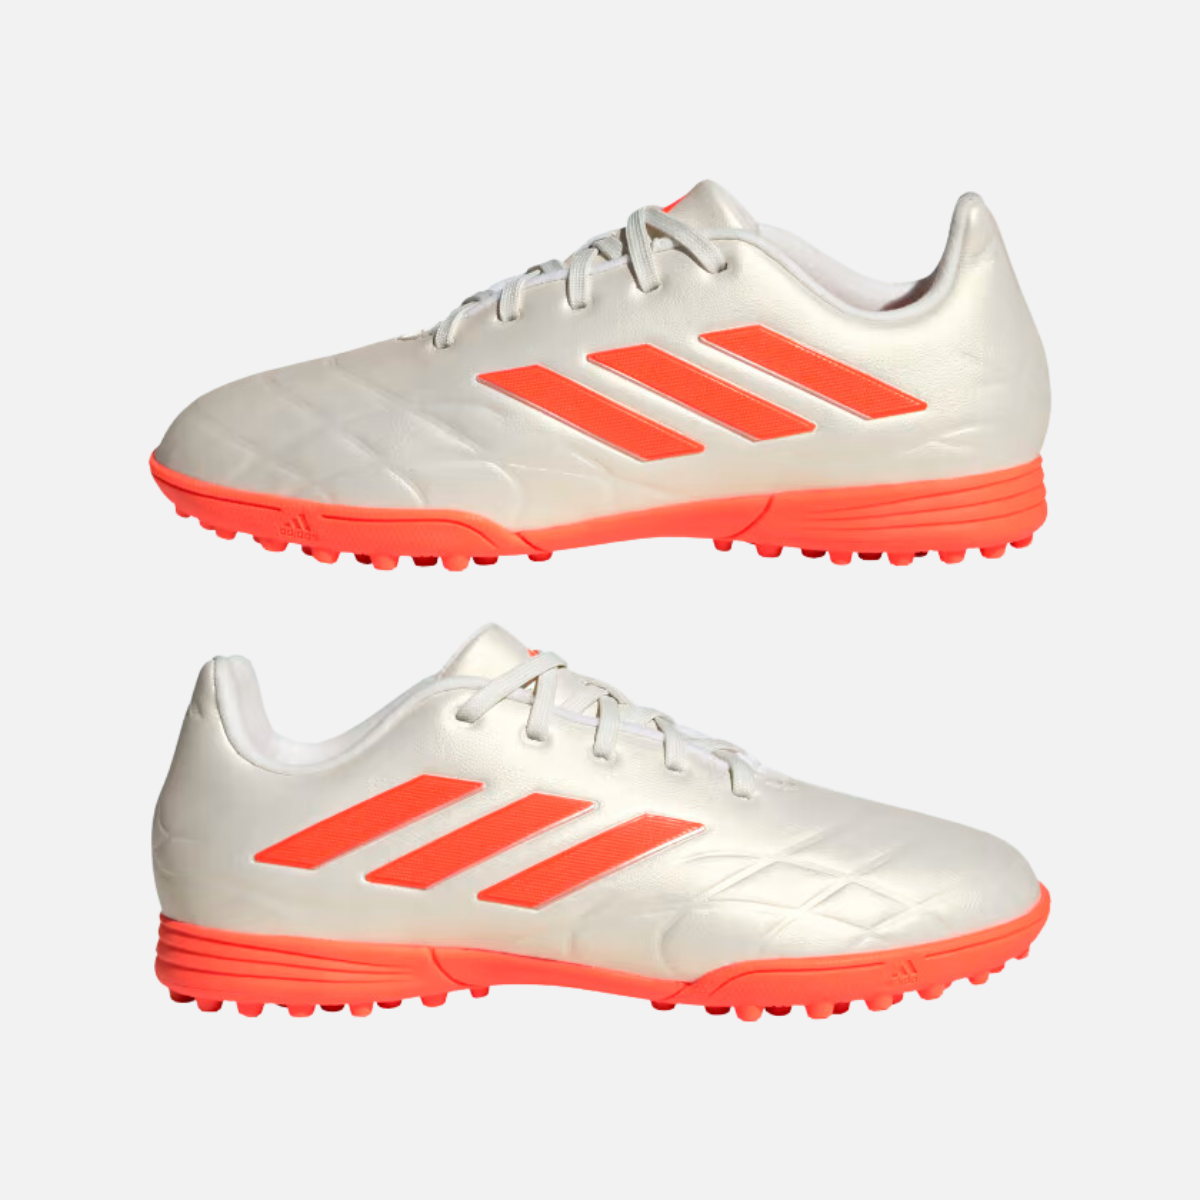 Adidas COPA PURE.3 TURF Kids Unisex Shoes BOY AND GIRL (4-16 YEAR) -Off White/Team Solar Orange/Off White